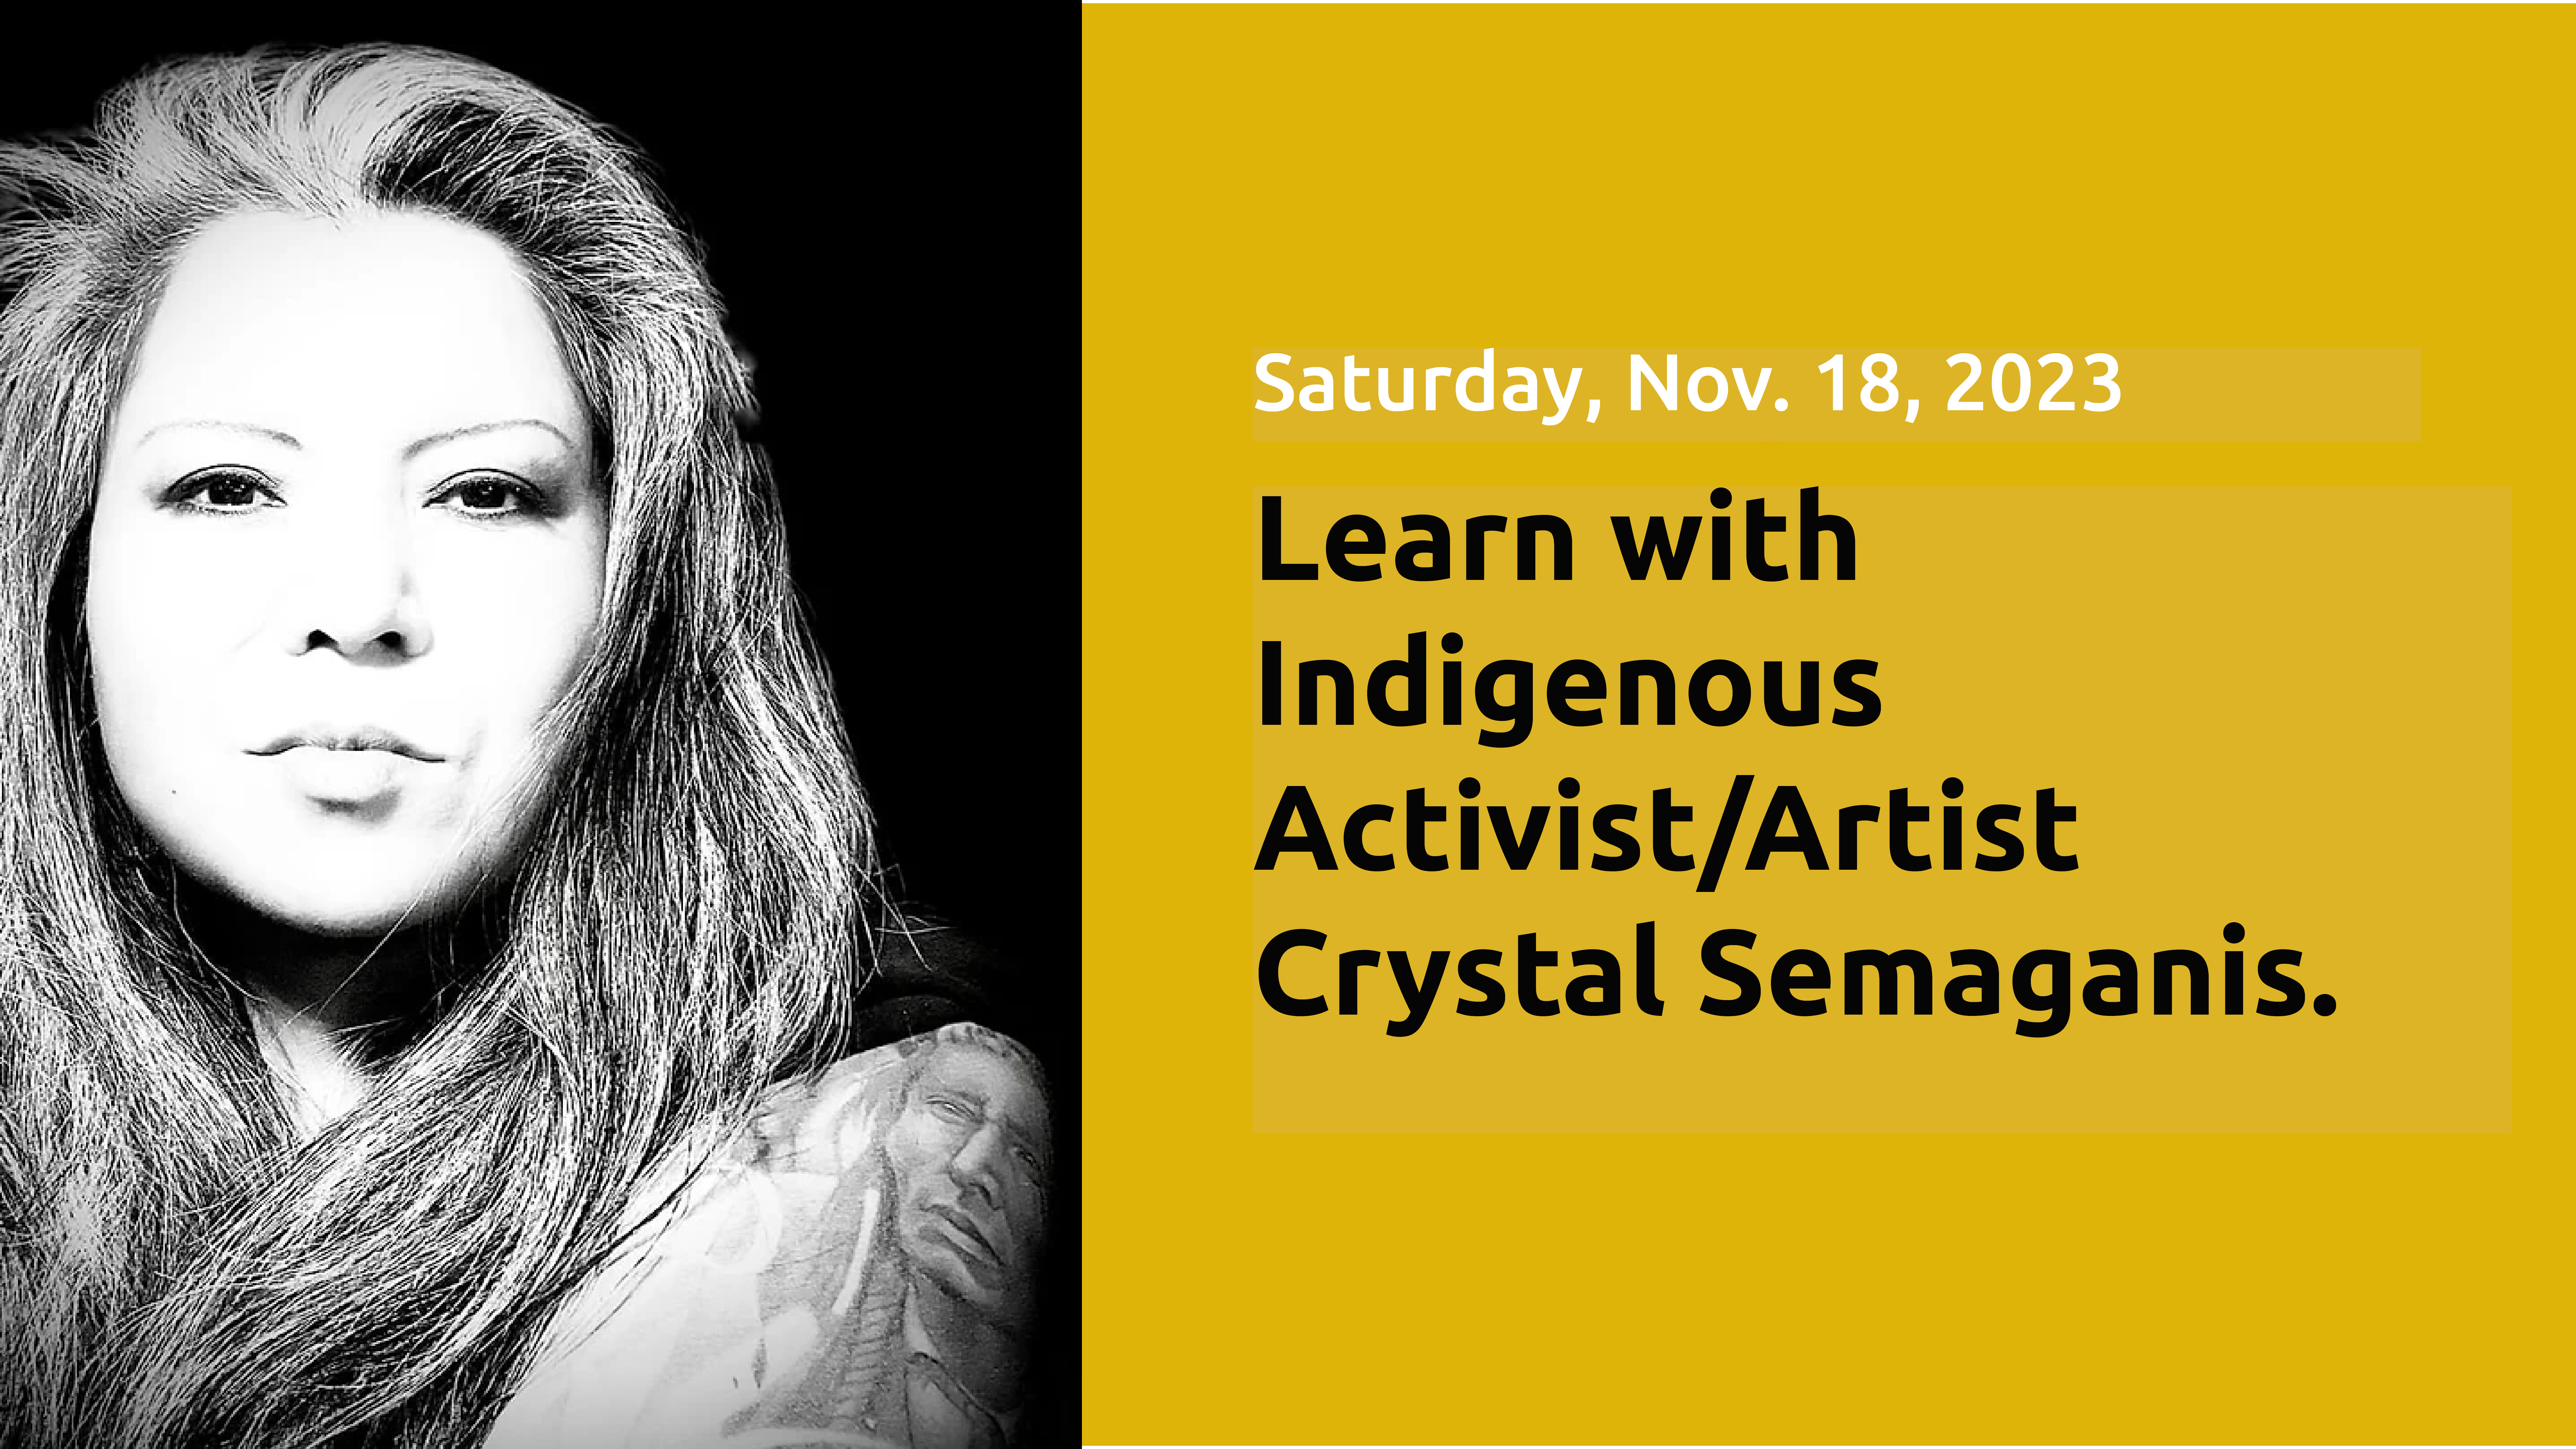 Black and white photo of Crystal Semaganis with text promoting learning opportunity at the Museum Nov. 18.